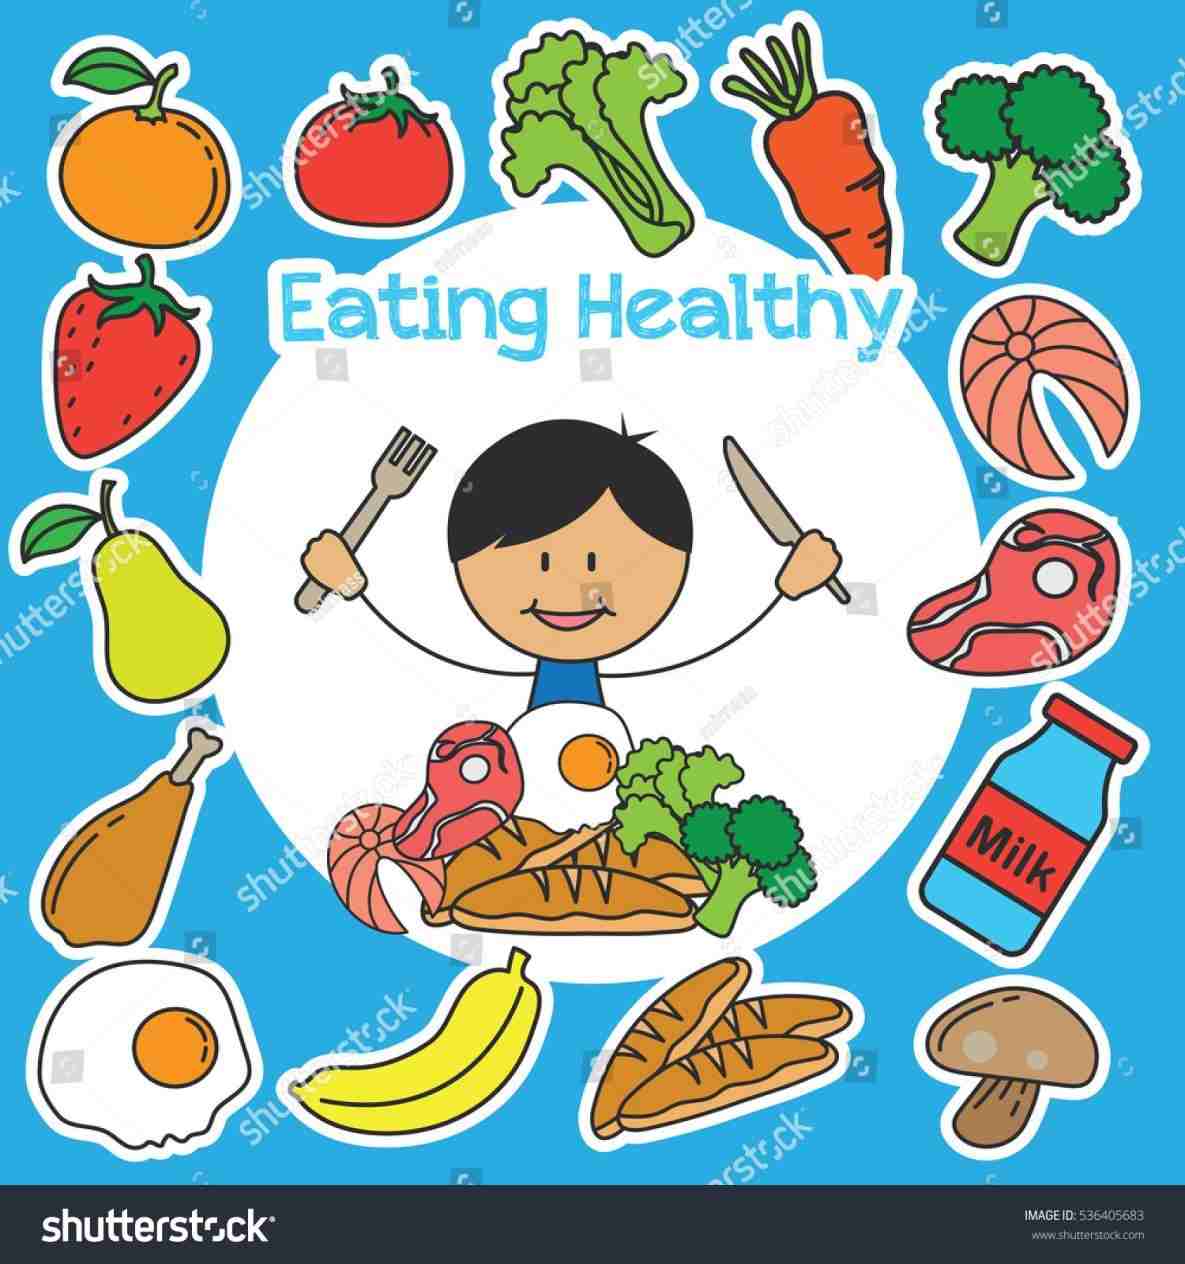 Kids Eating Healthy Foods Clipart of healthy eating.